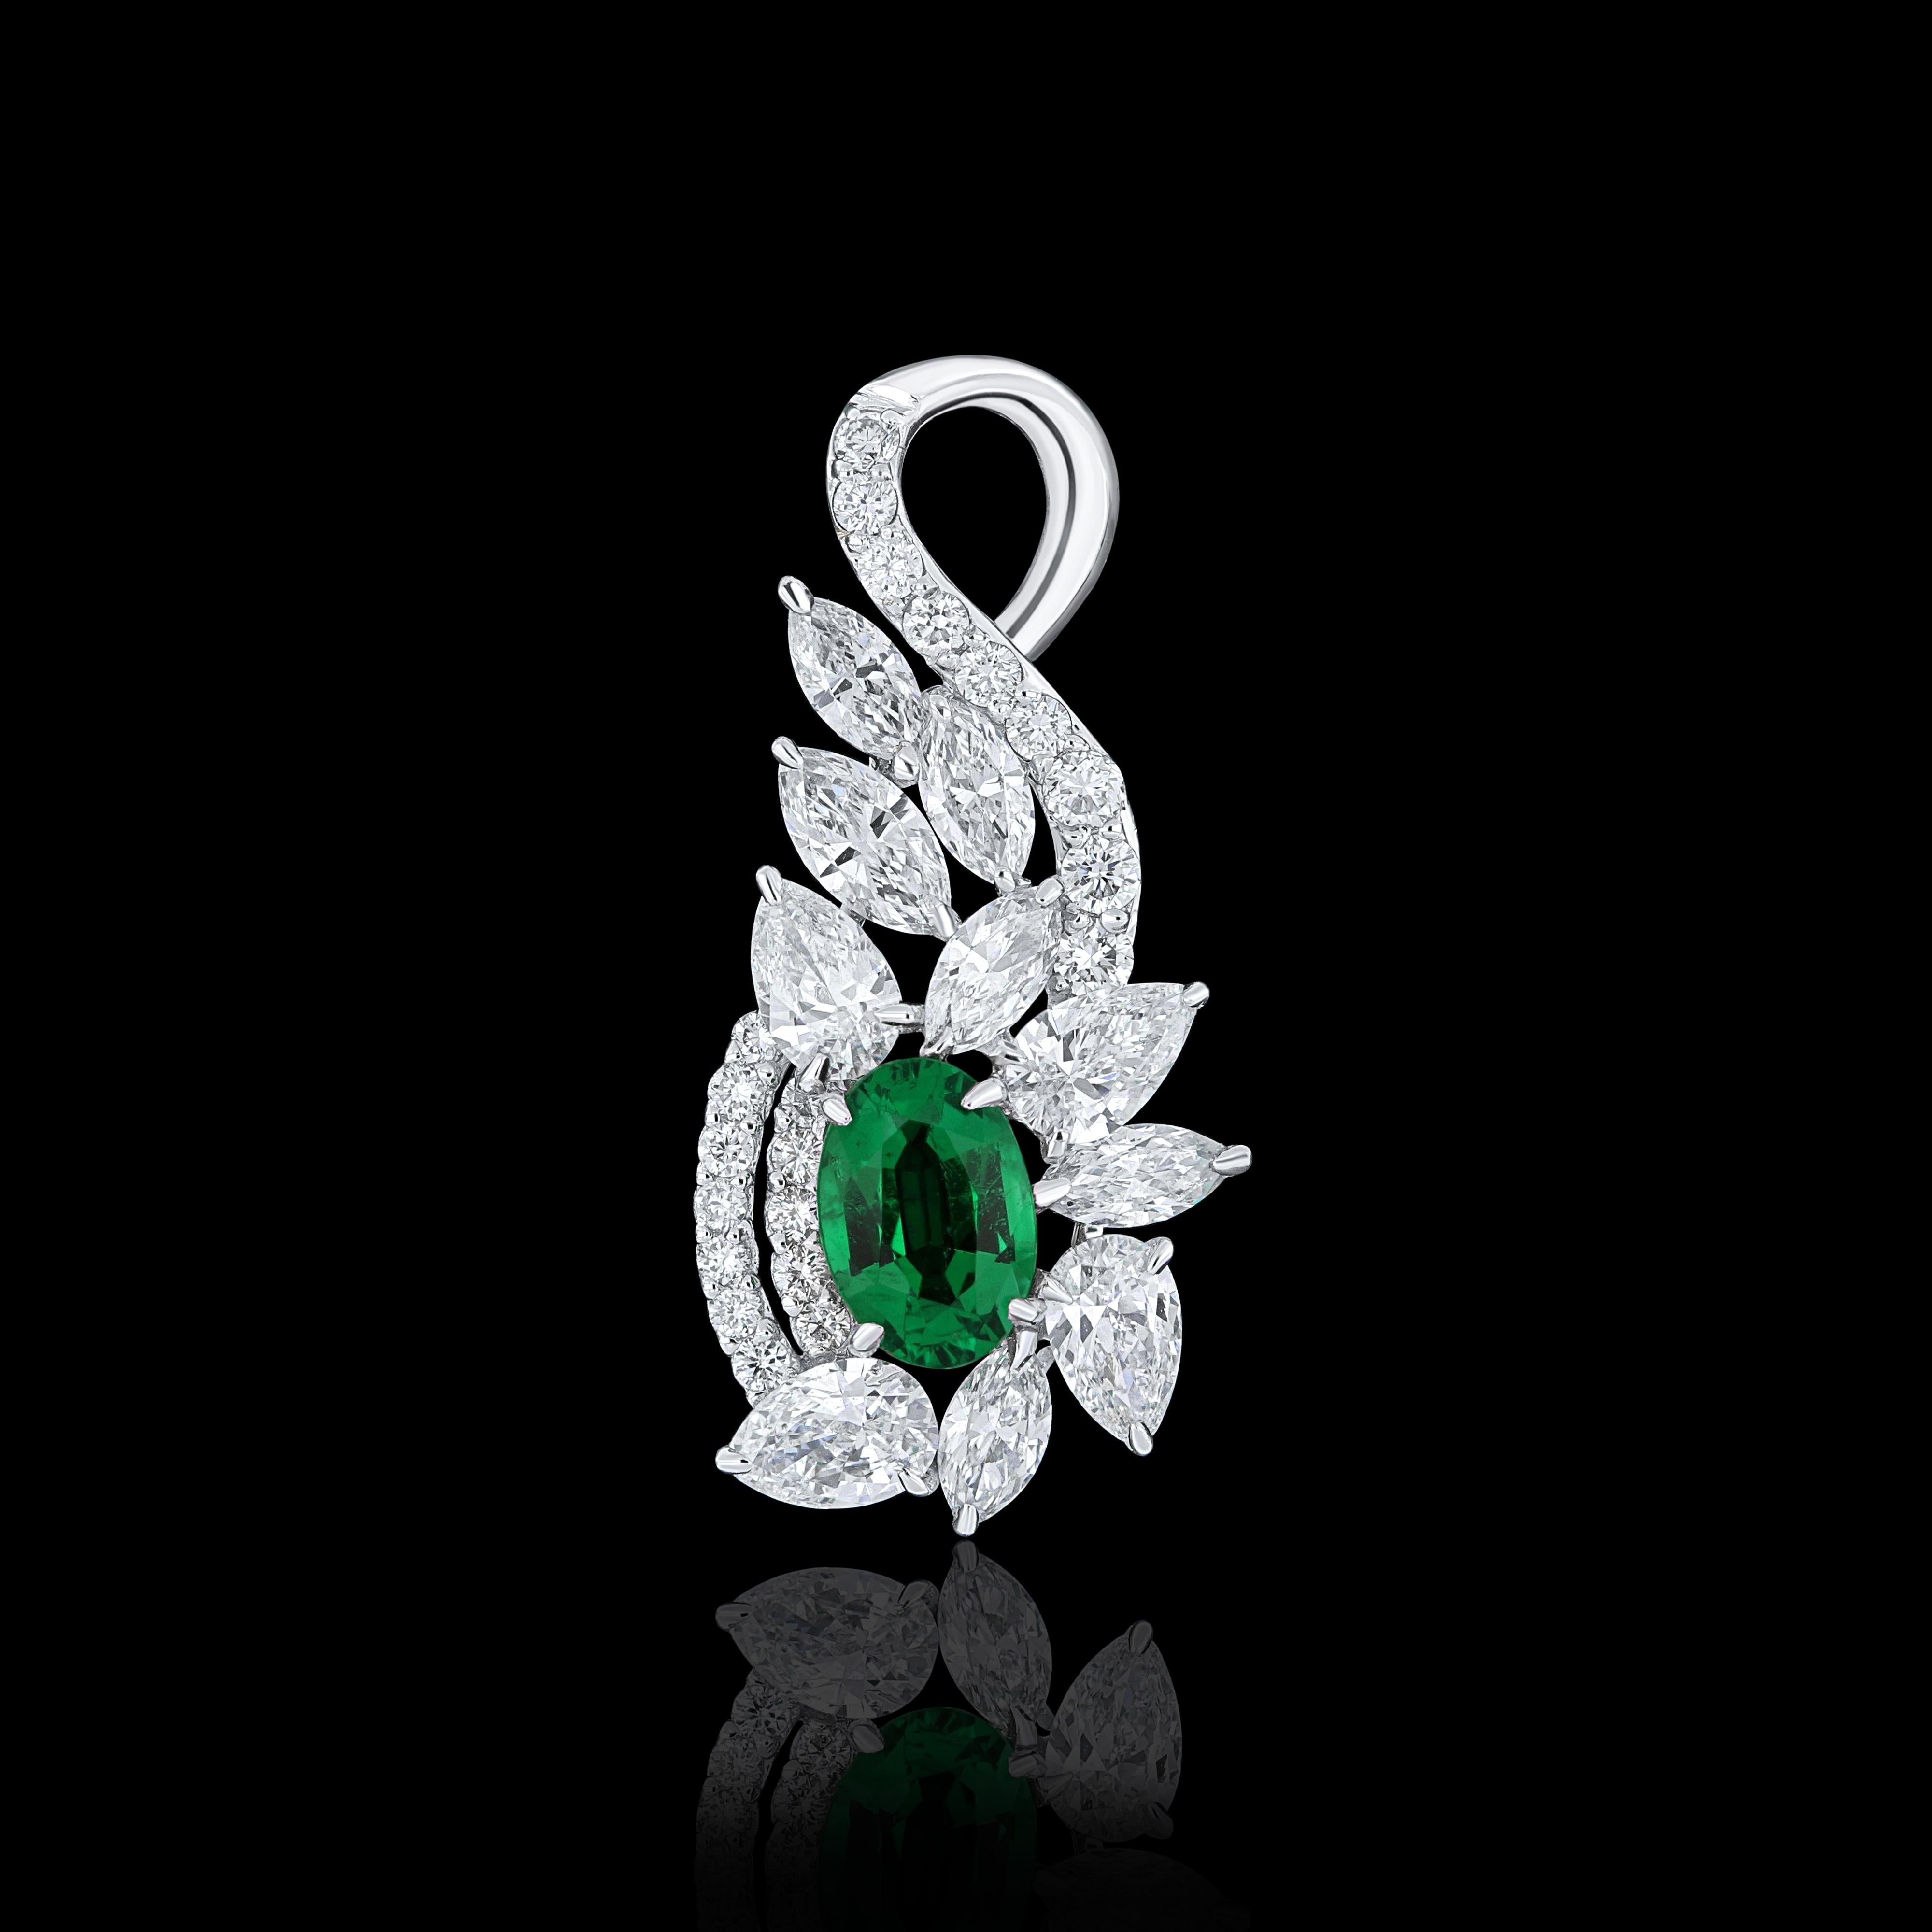 Elegant and exquisitely detailed 18 Karat White Gold Pendant, center set with 0.39Cts .Oval Shape Emerald and micro pave set Diamonds, weighing approx. 0.95Cts Beautifully Hand crafted in 18 Karat White Gold.

Stone Detail:
Emerald: 6x4MM

Stone